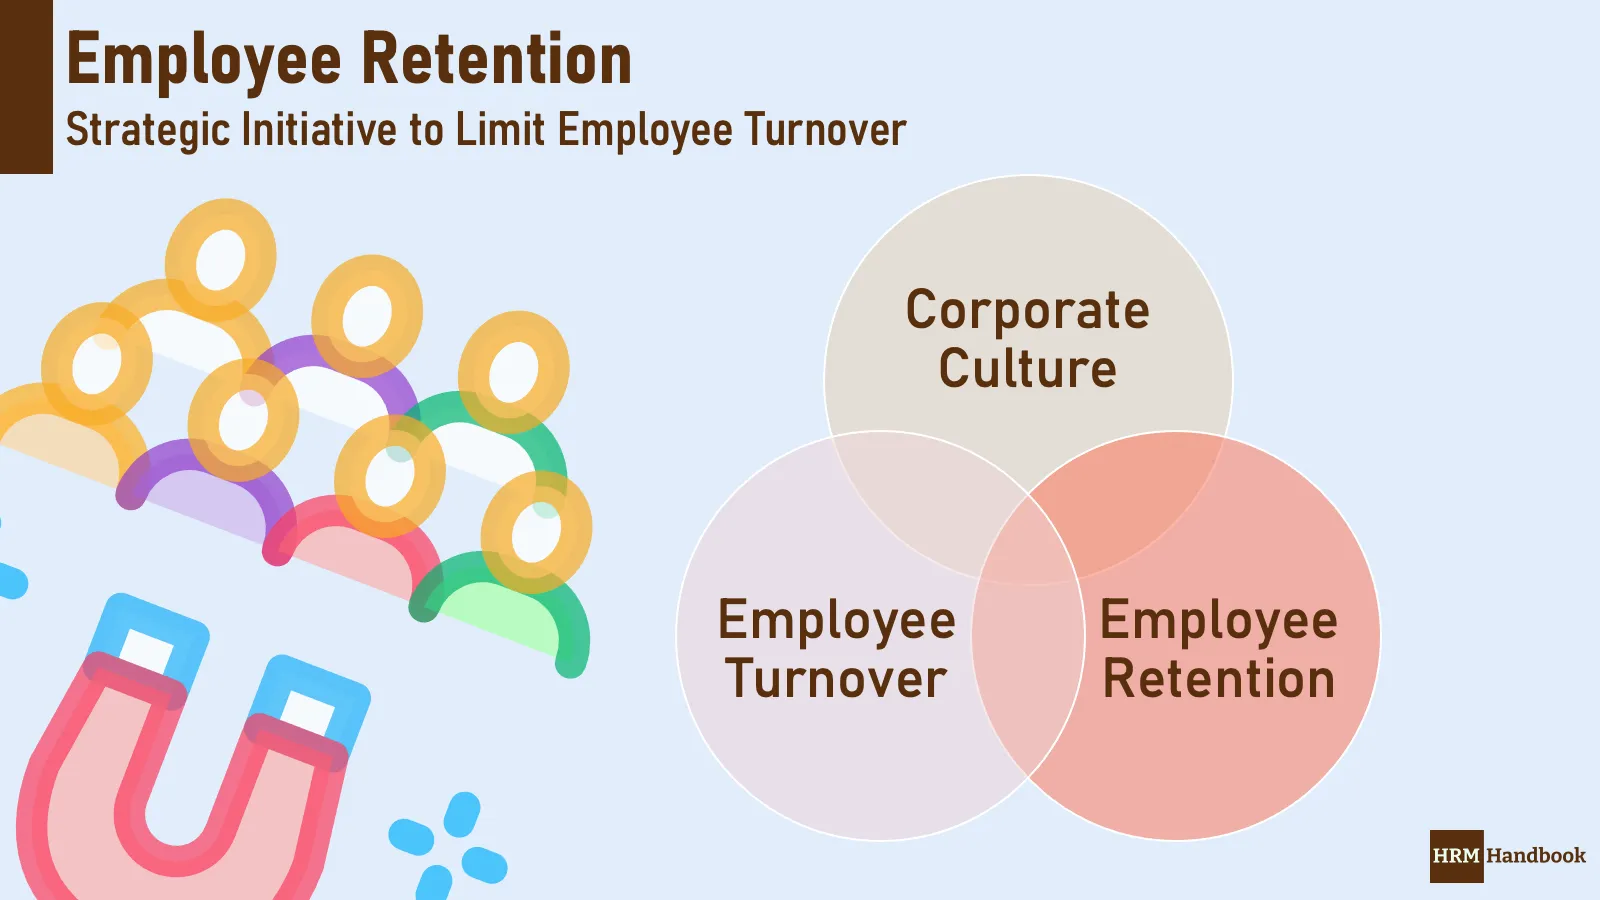 Employee Retention Overview